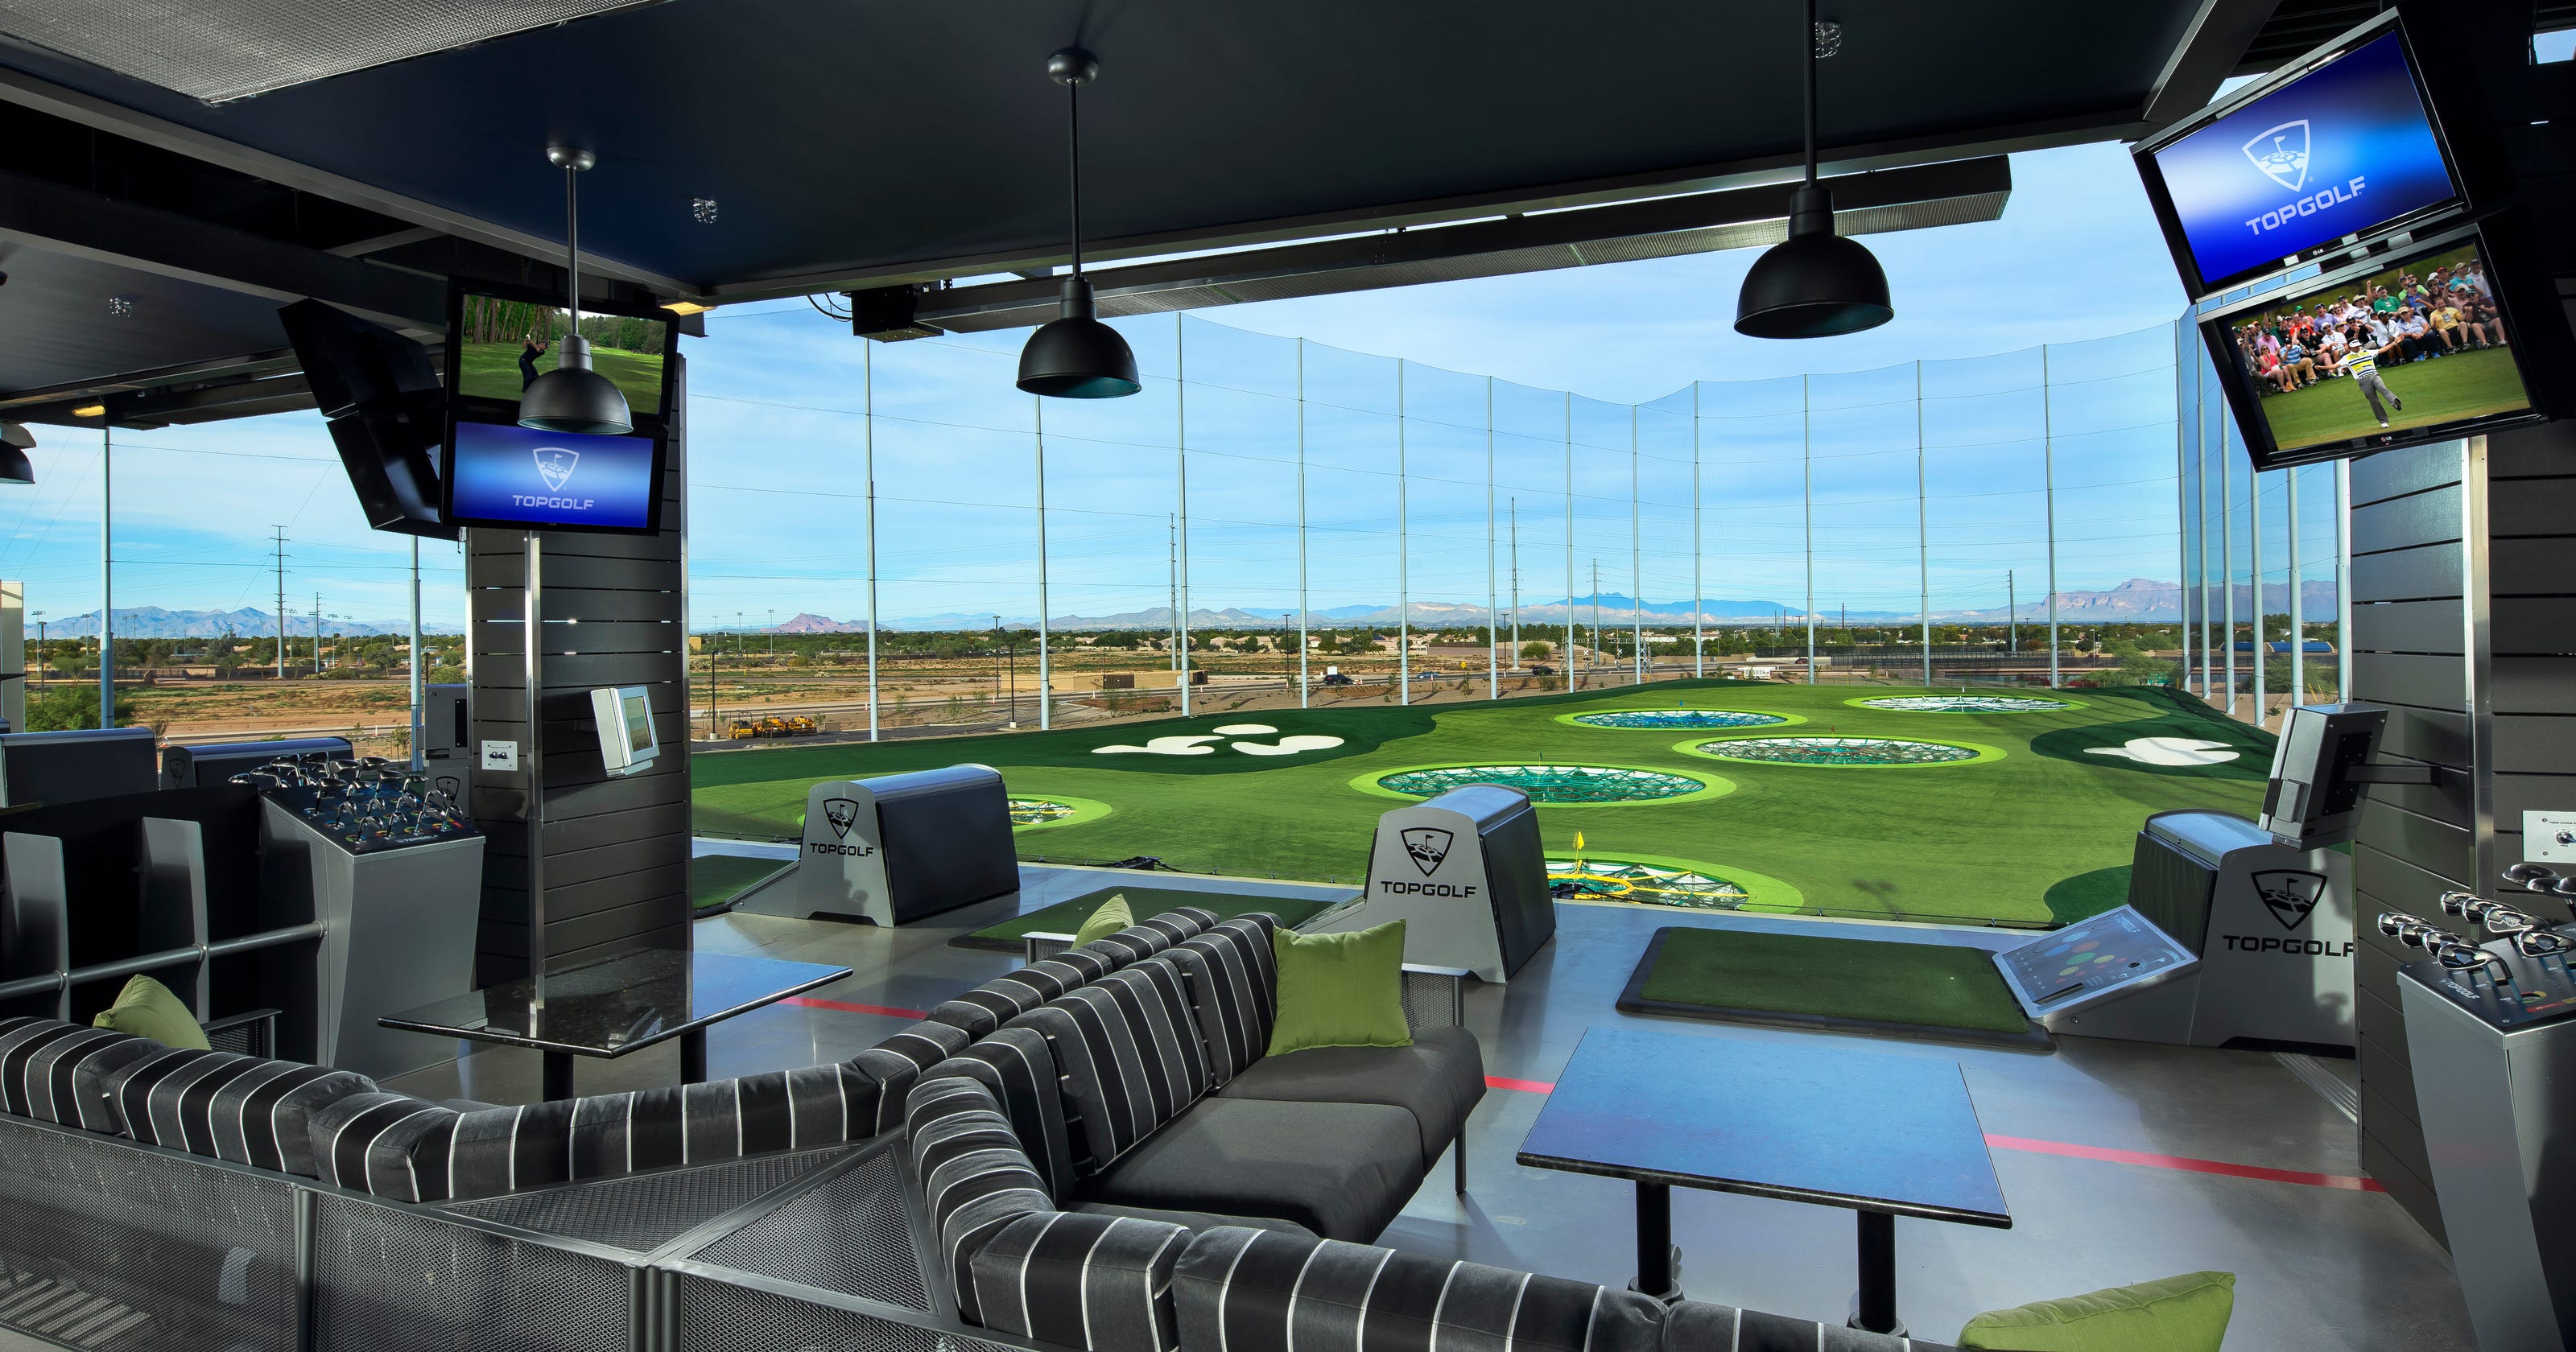 Image result for topgolf